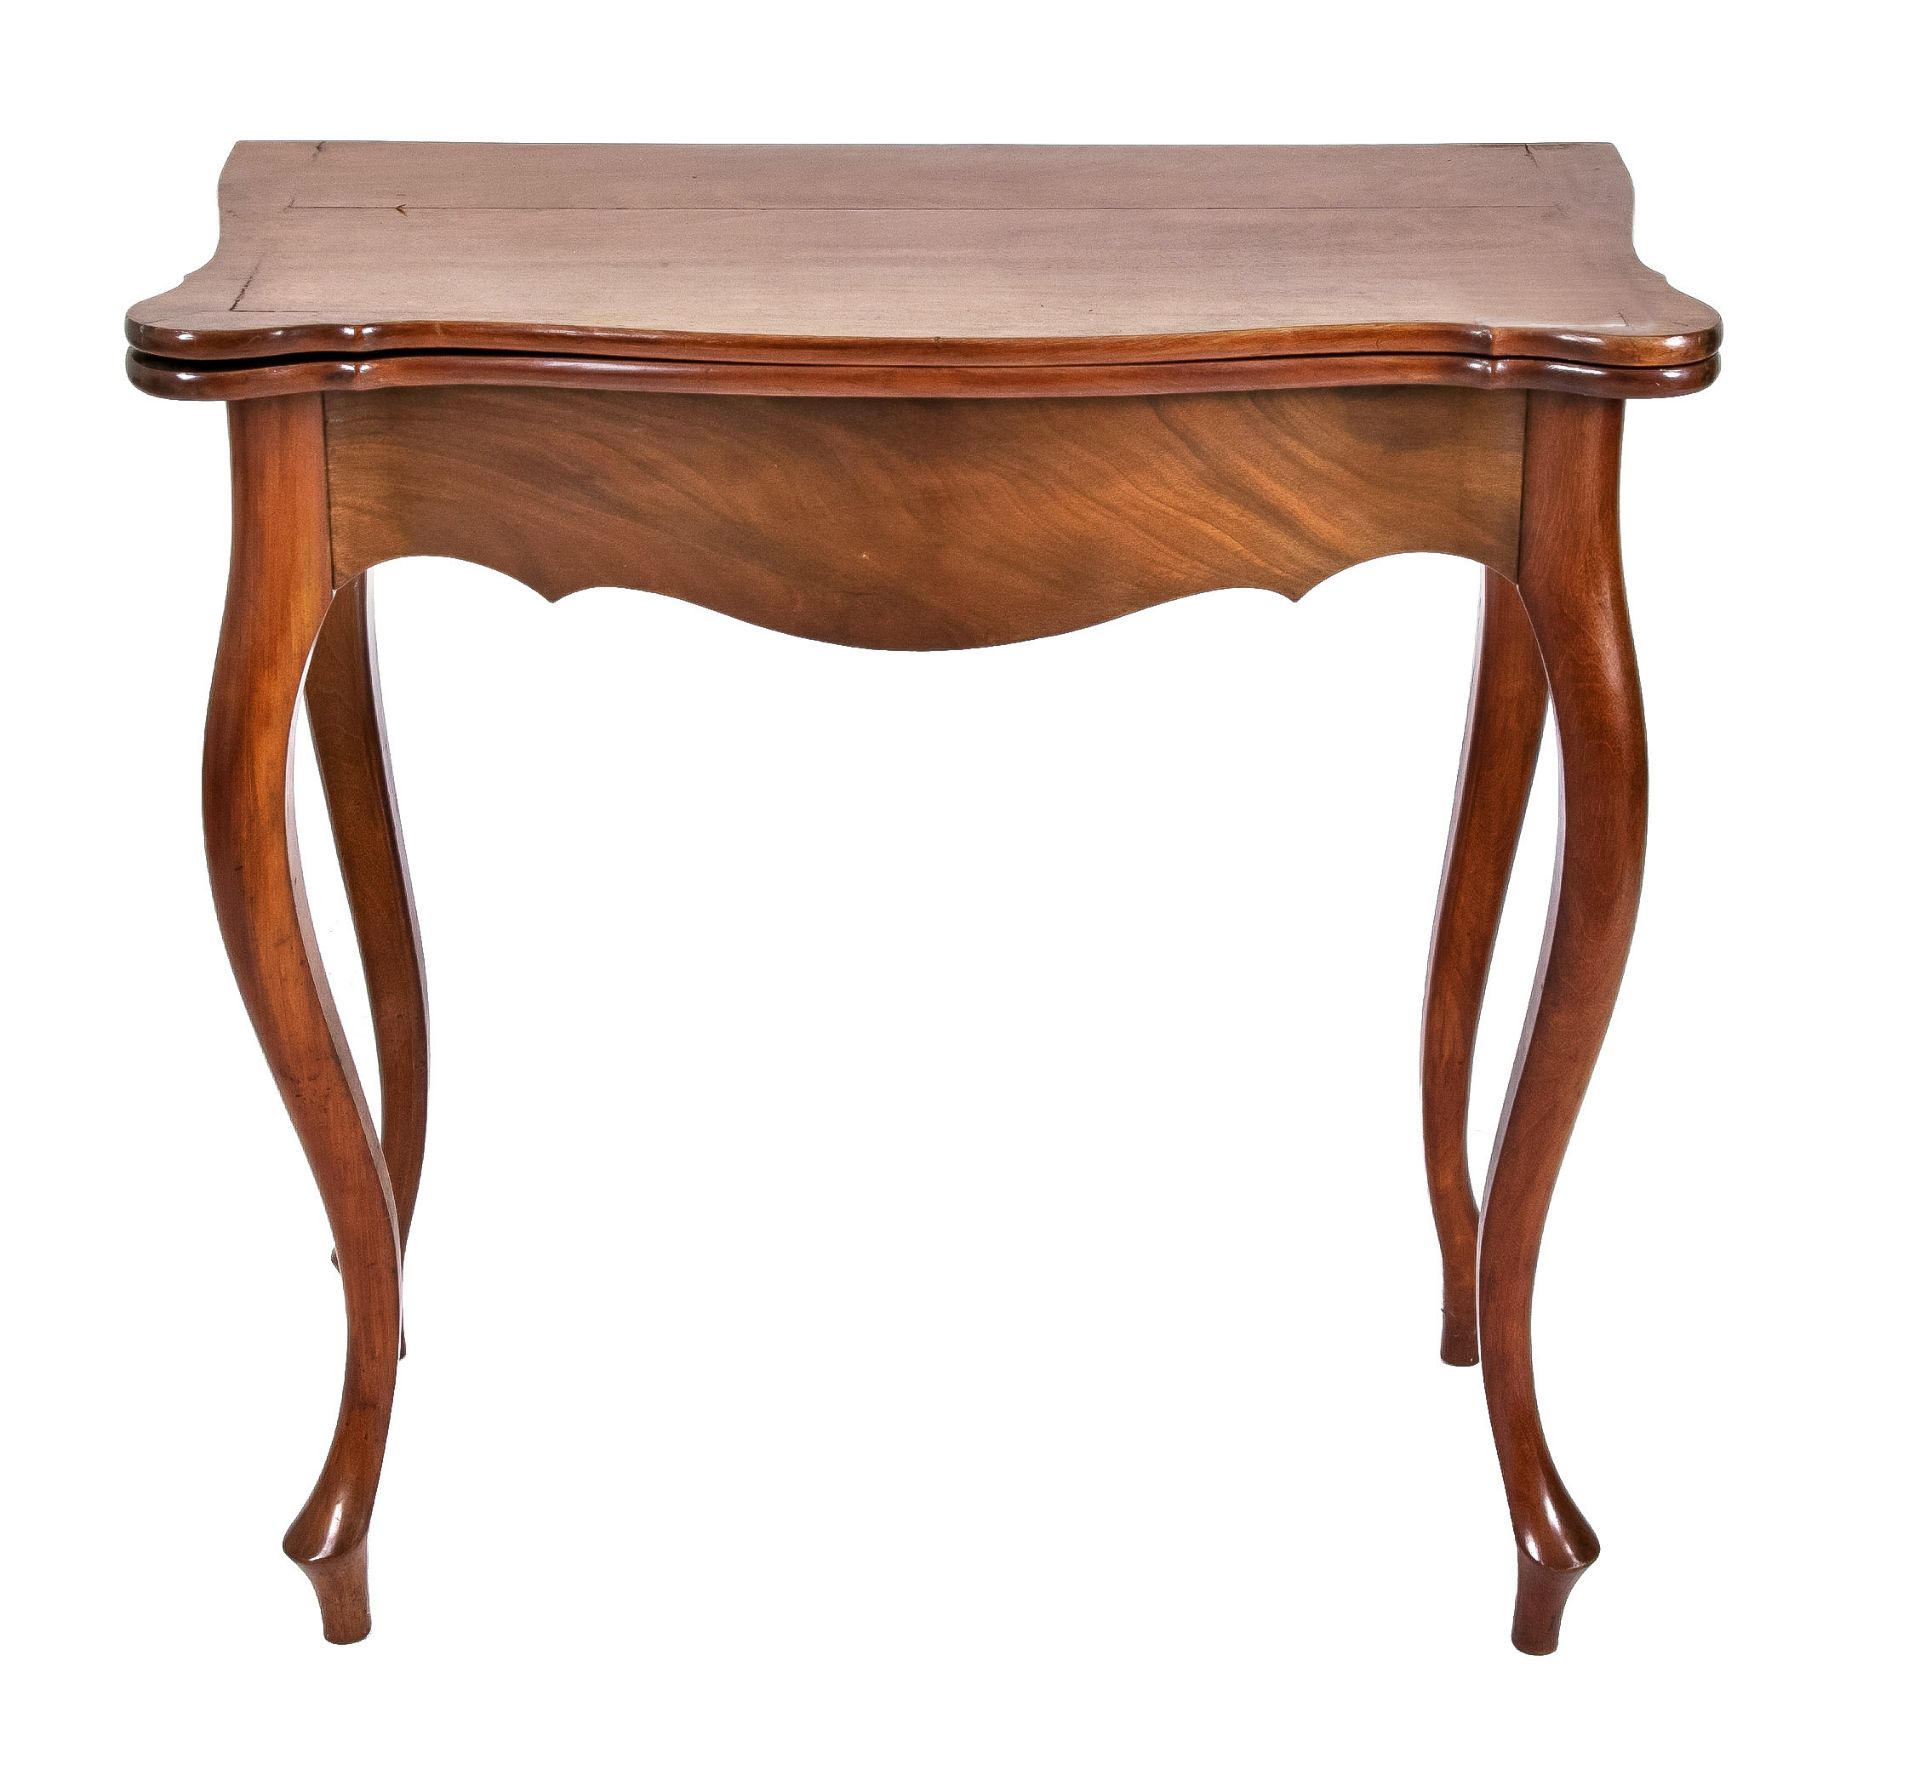 Console/play table circa 1870, mahogany, 79 x 80 x 46 cm.- The furniture cannot be viewed in our - Image 2 of 2